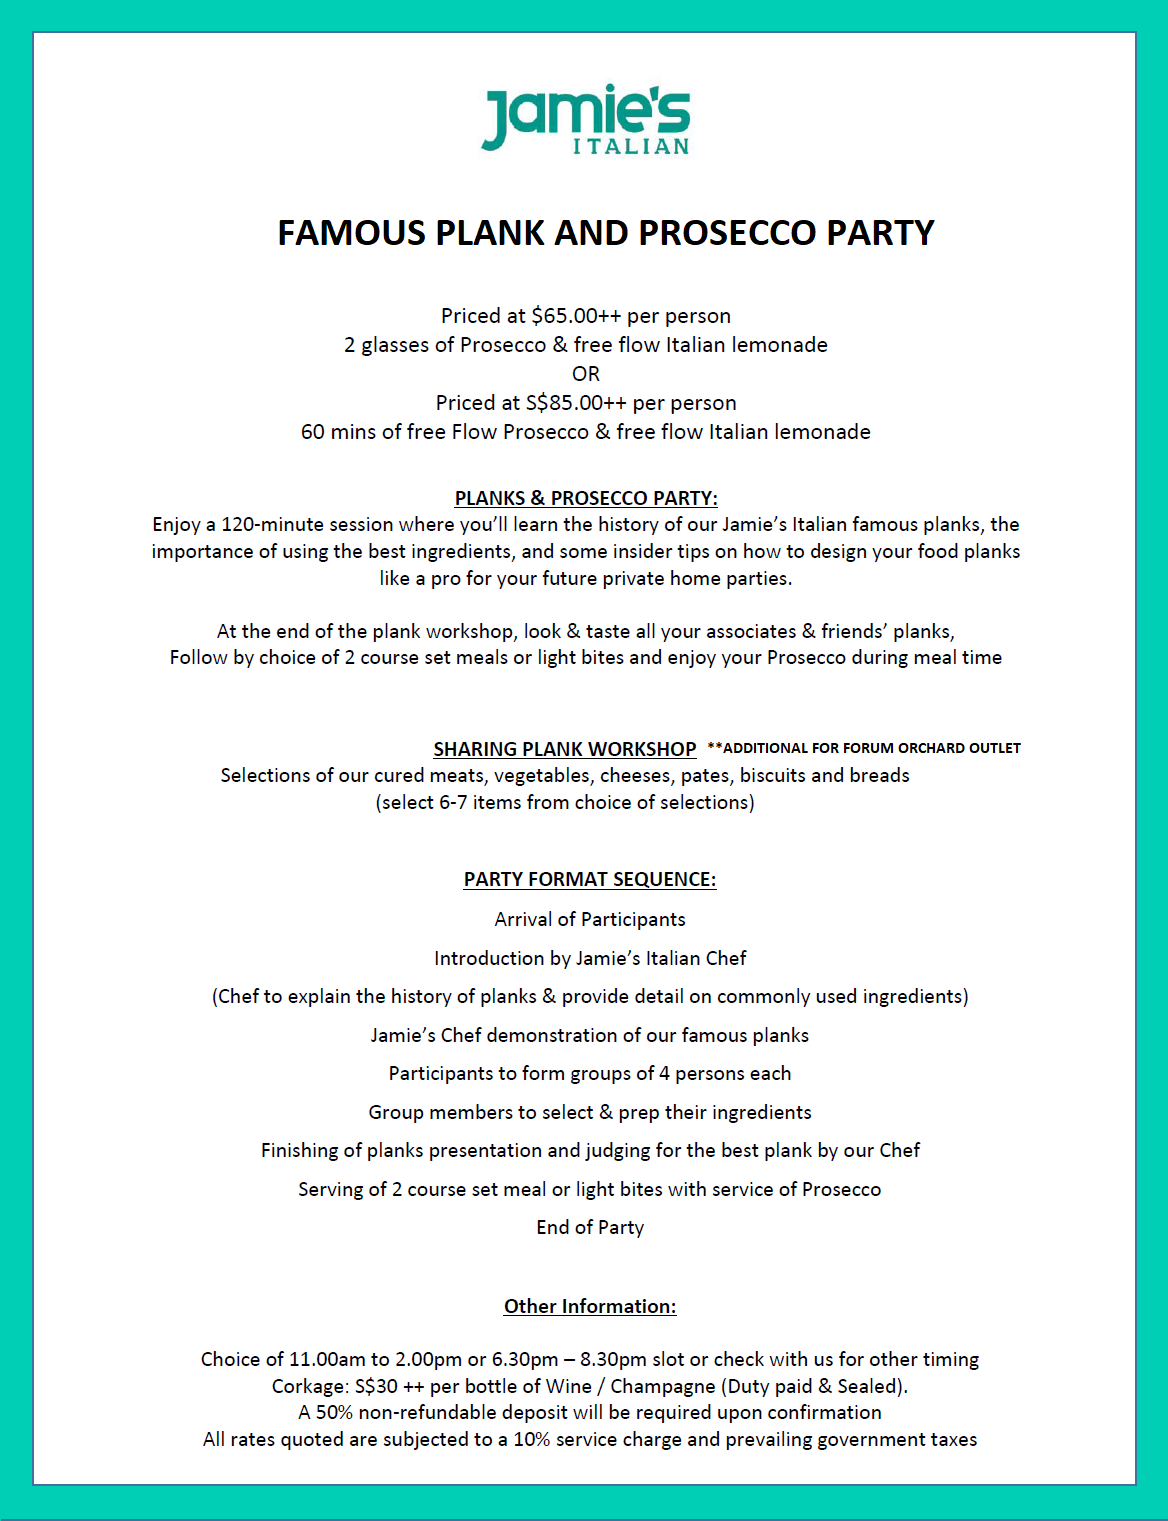 Famous Plank & Prosecco Party